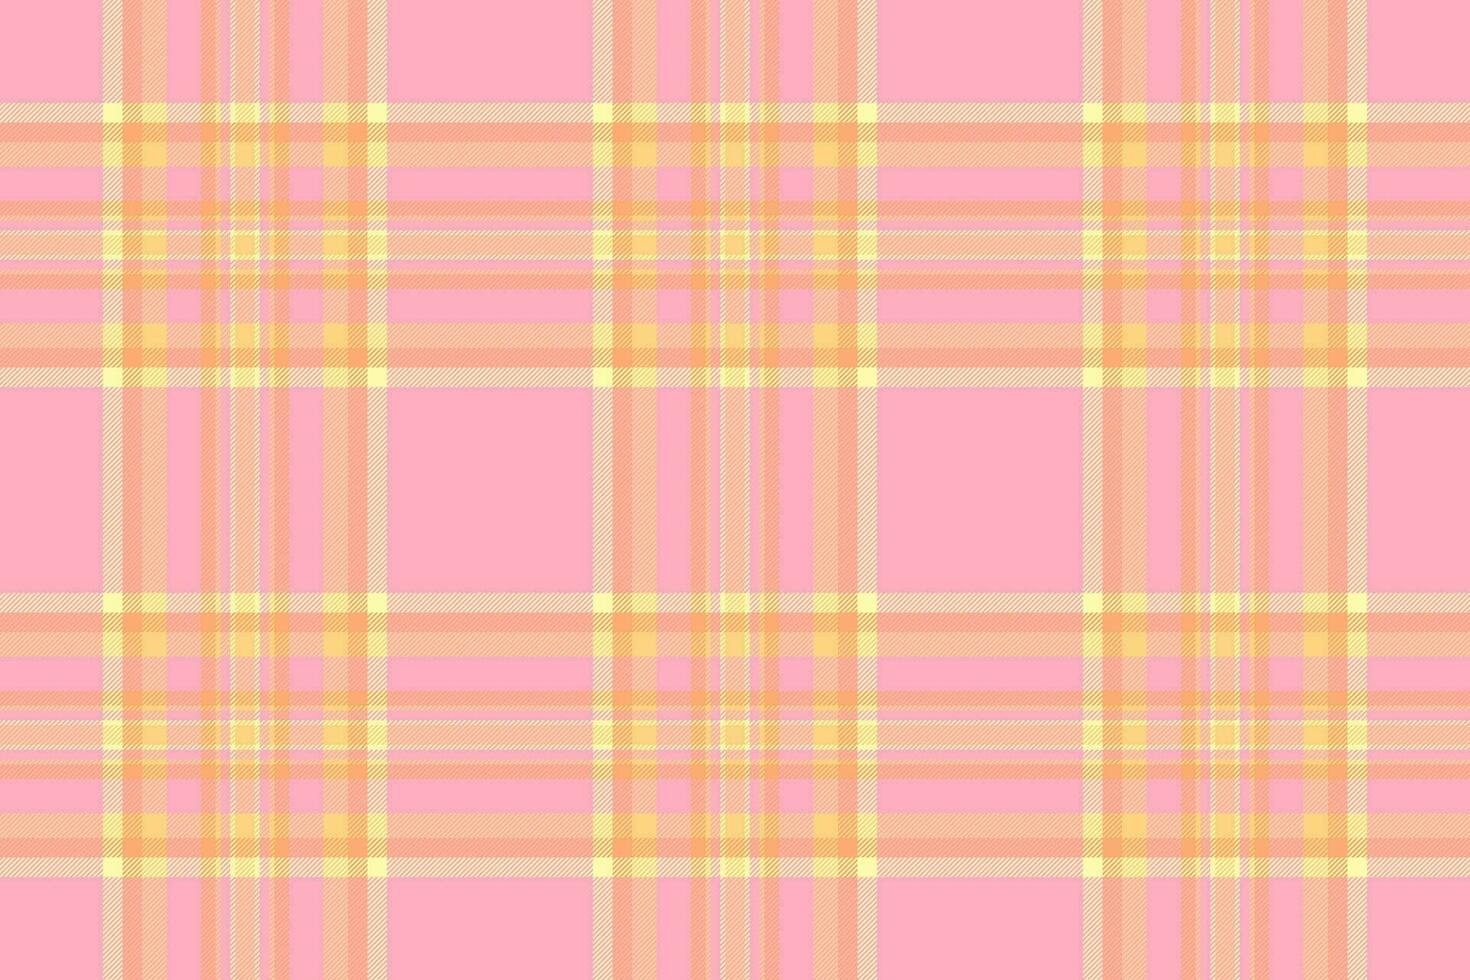 Textile check pattern of background seamless vector with a tartan texture fabric plaid.